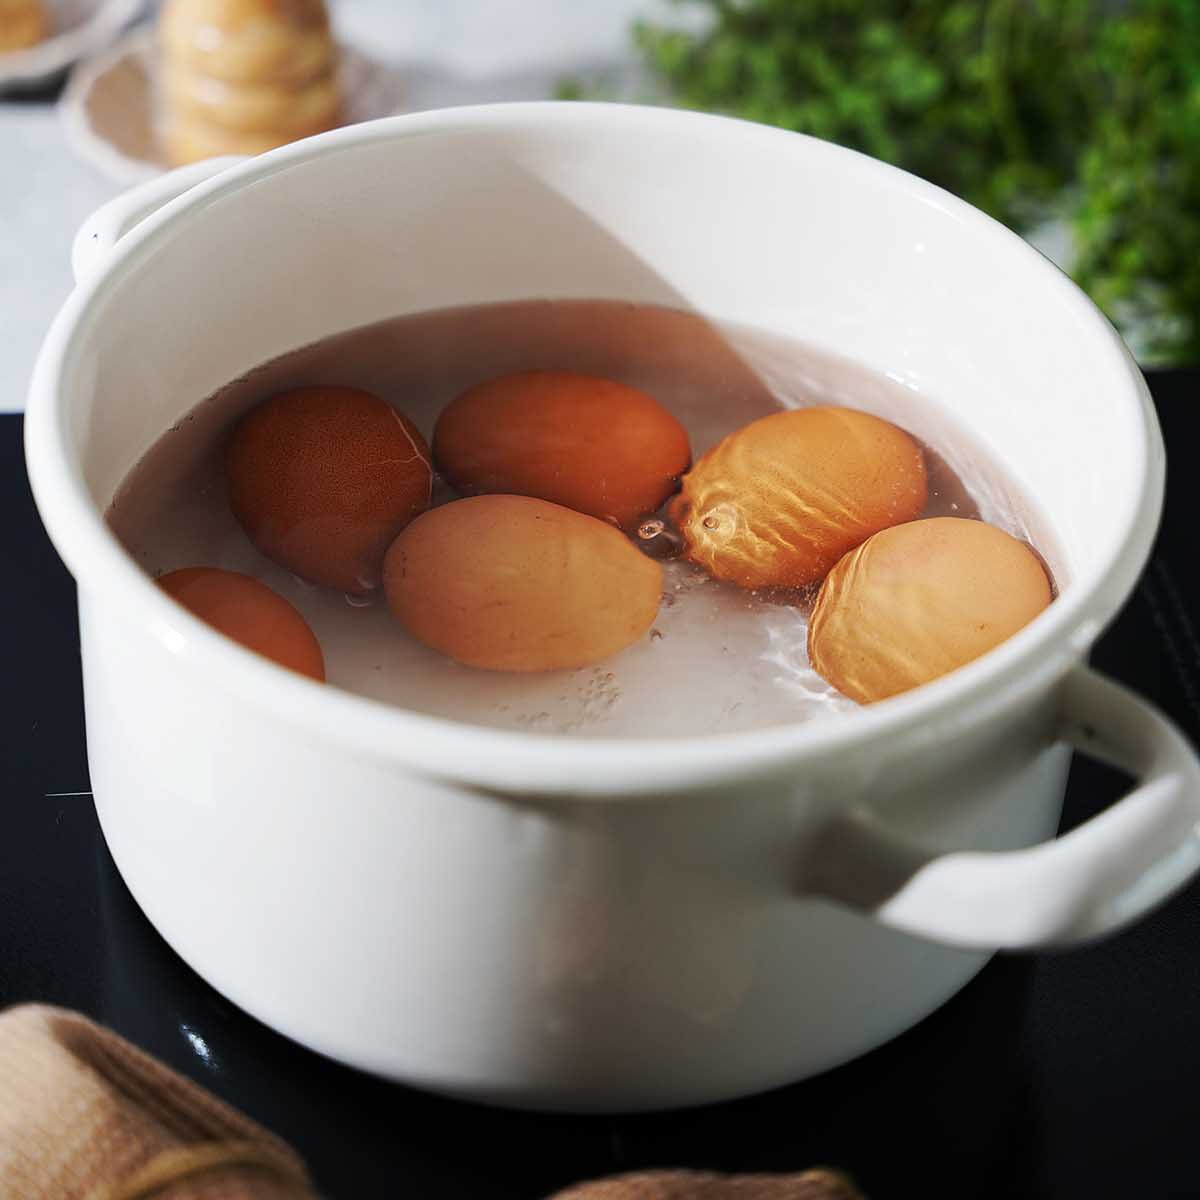 6 eggs boiling in water.